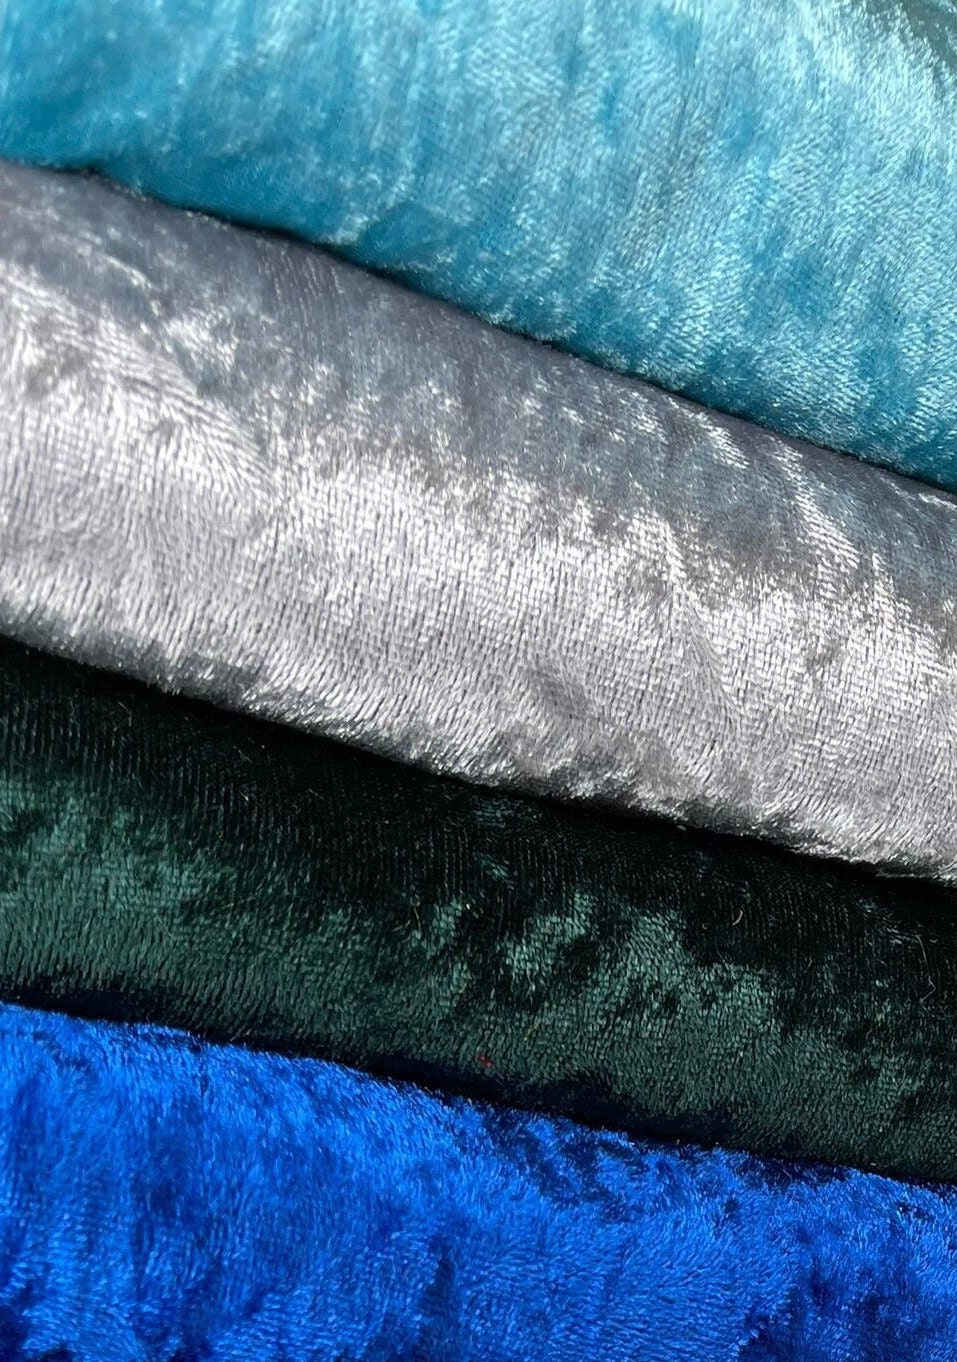 Panne Velvet Fabric Bolts, by the Yard and Sample Swatches – My Textile  Fabric